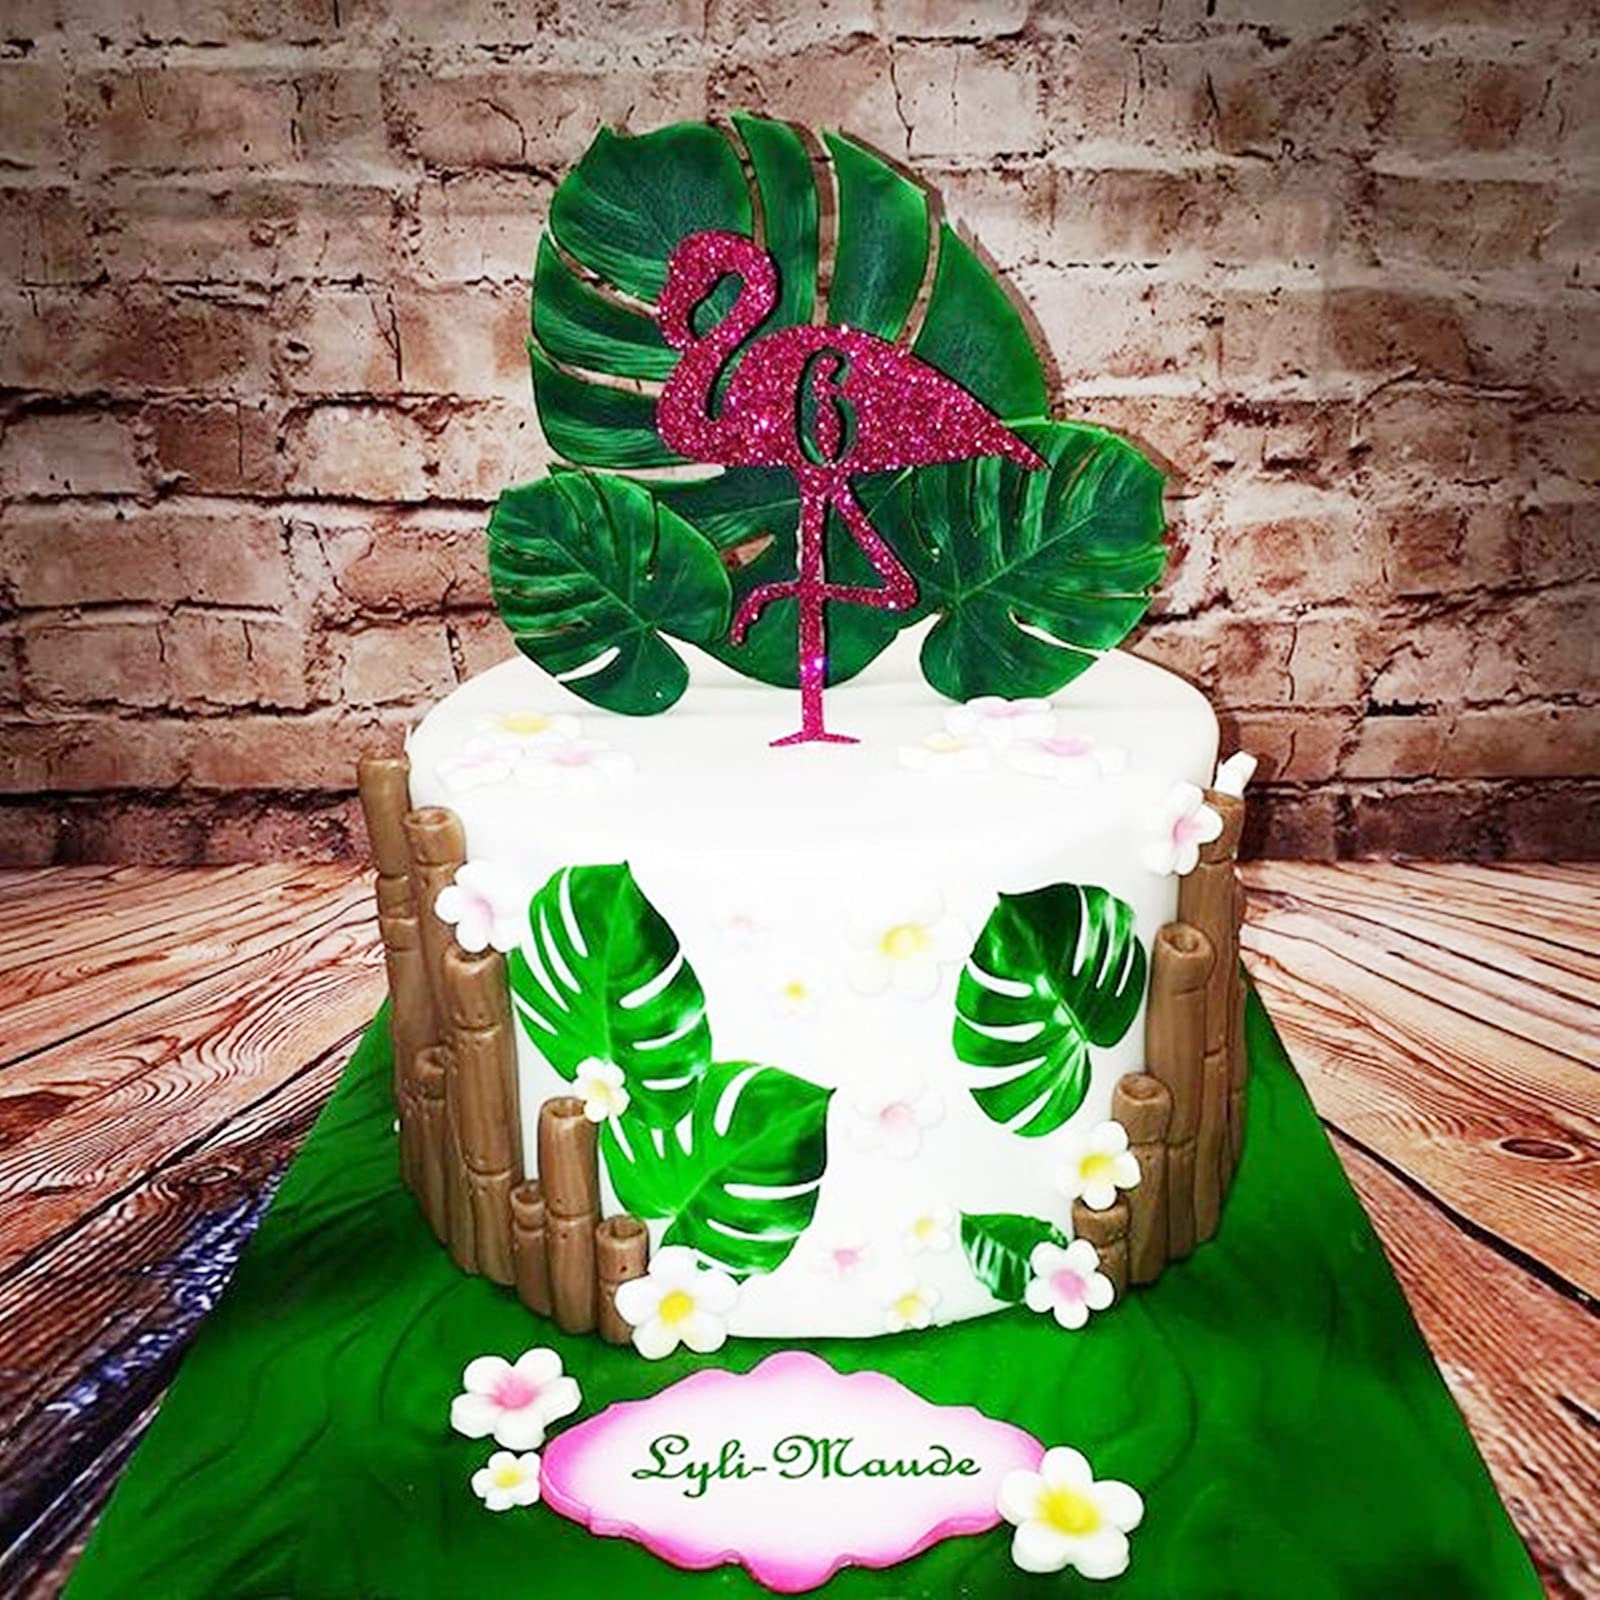 Leaves Silicone Fondant Mold, Tropical Leaf Monstera Leafage Cake Decorating Mold for Chocolate Cookie Pastry Pies,Cake Cup Cake Candy Decoration,Polymer Clay